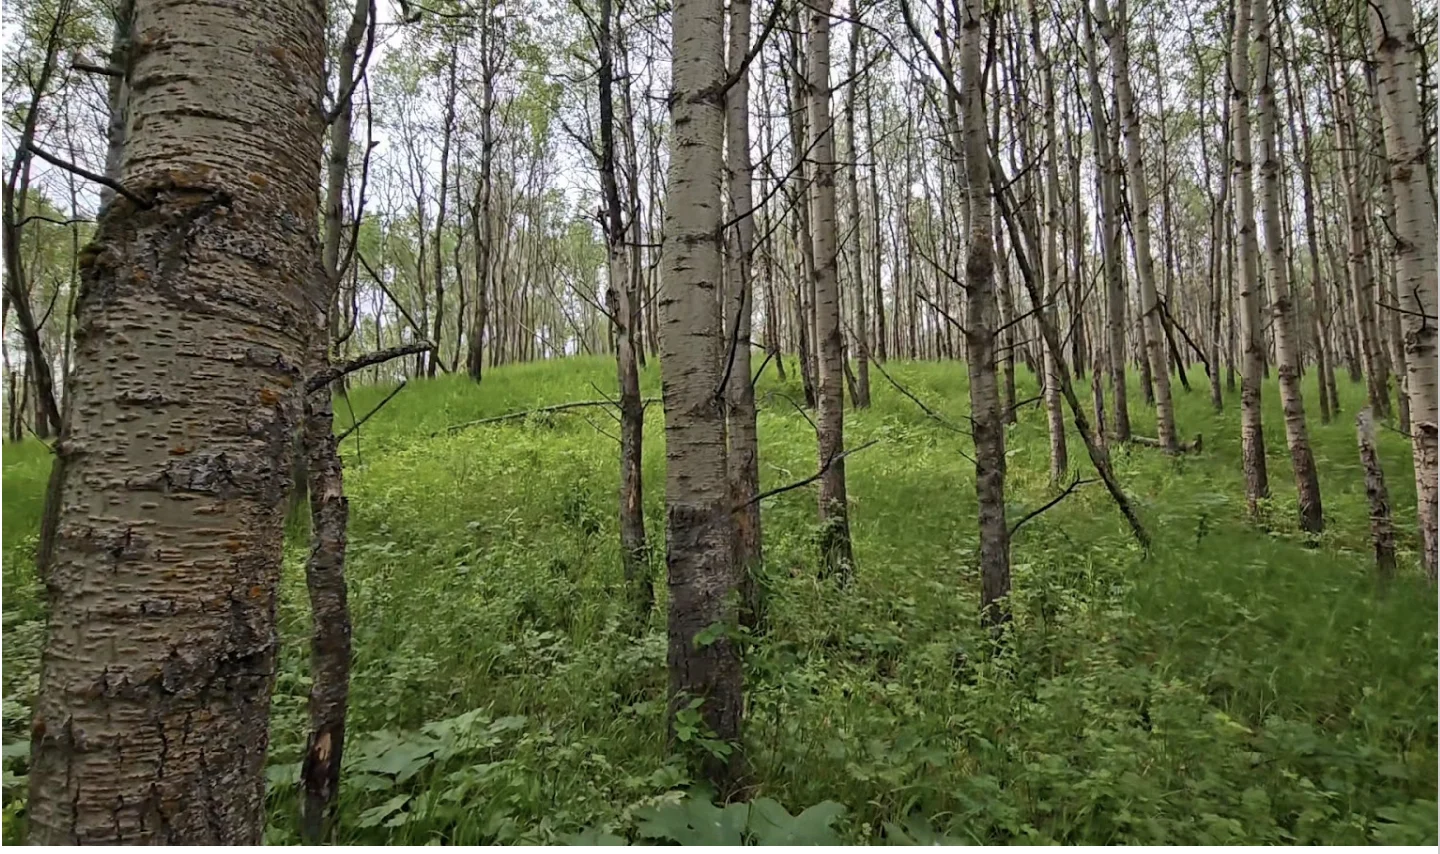 Connor O'Donovan: Ann and Sandy Cross Conservation Area, Calgary, Alberta, trees, hiking, trail, hike